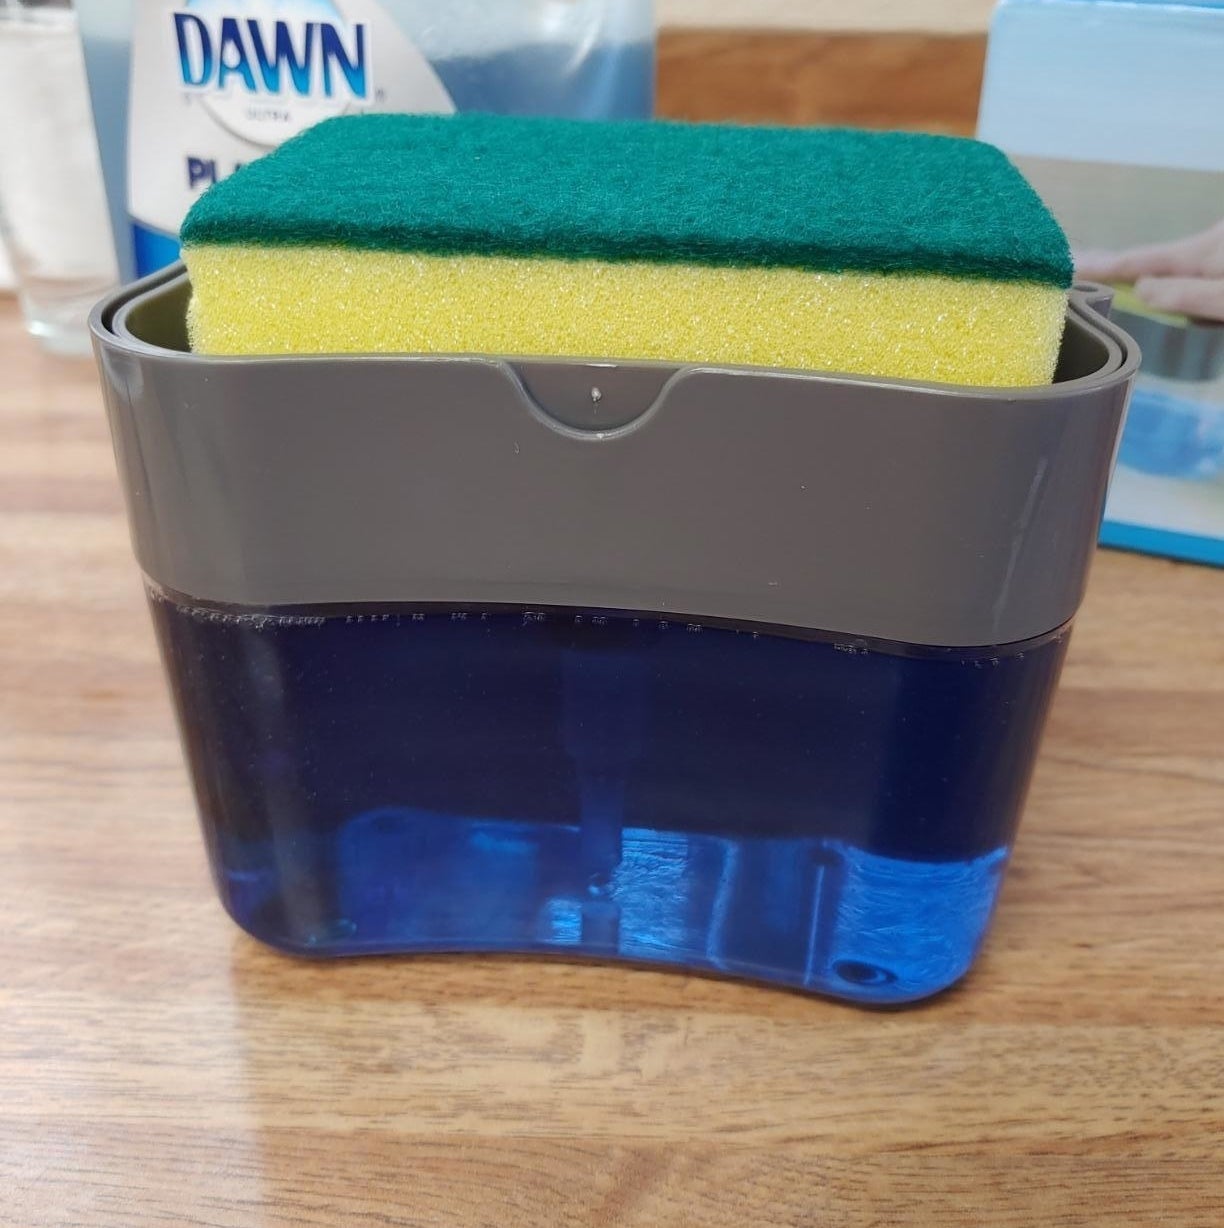 the top of the dispenser also acts as a caddy for the dish sponge 